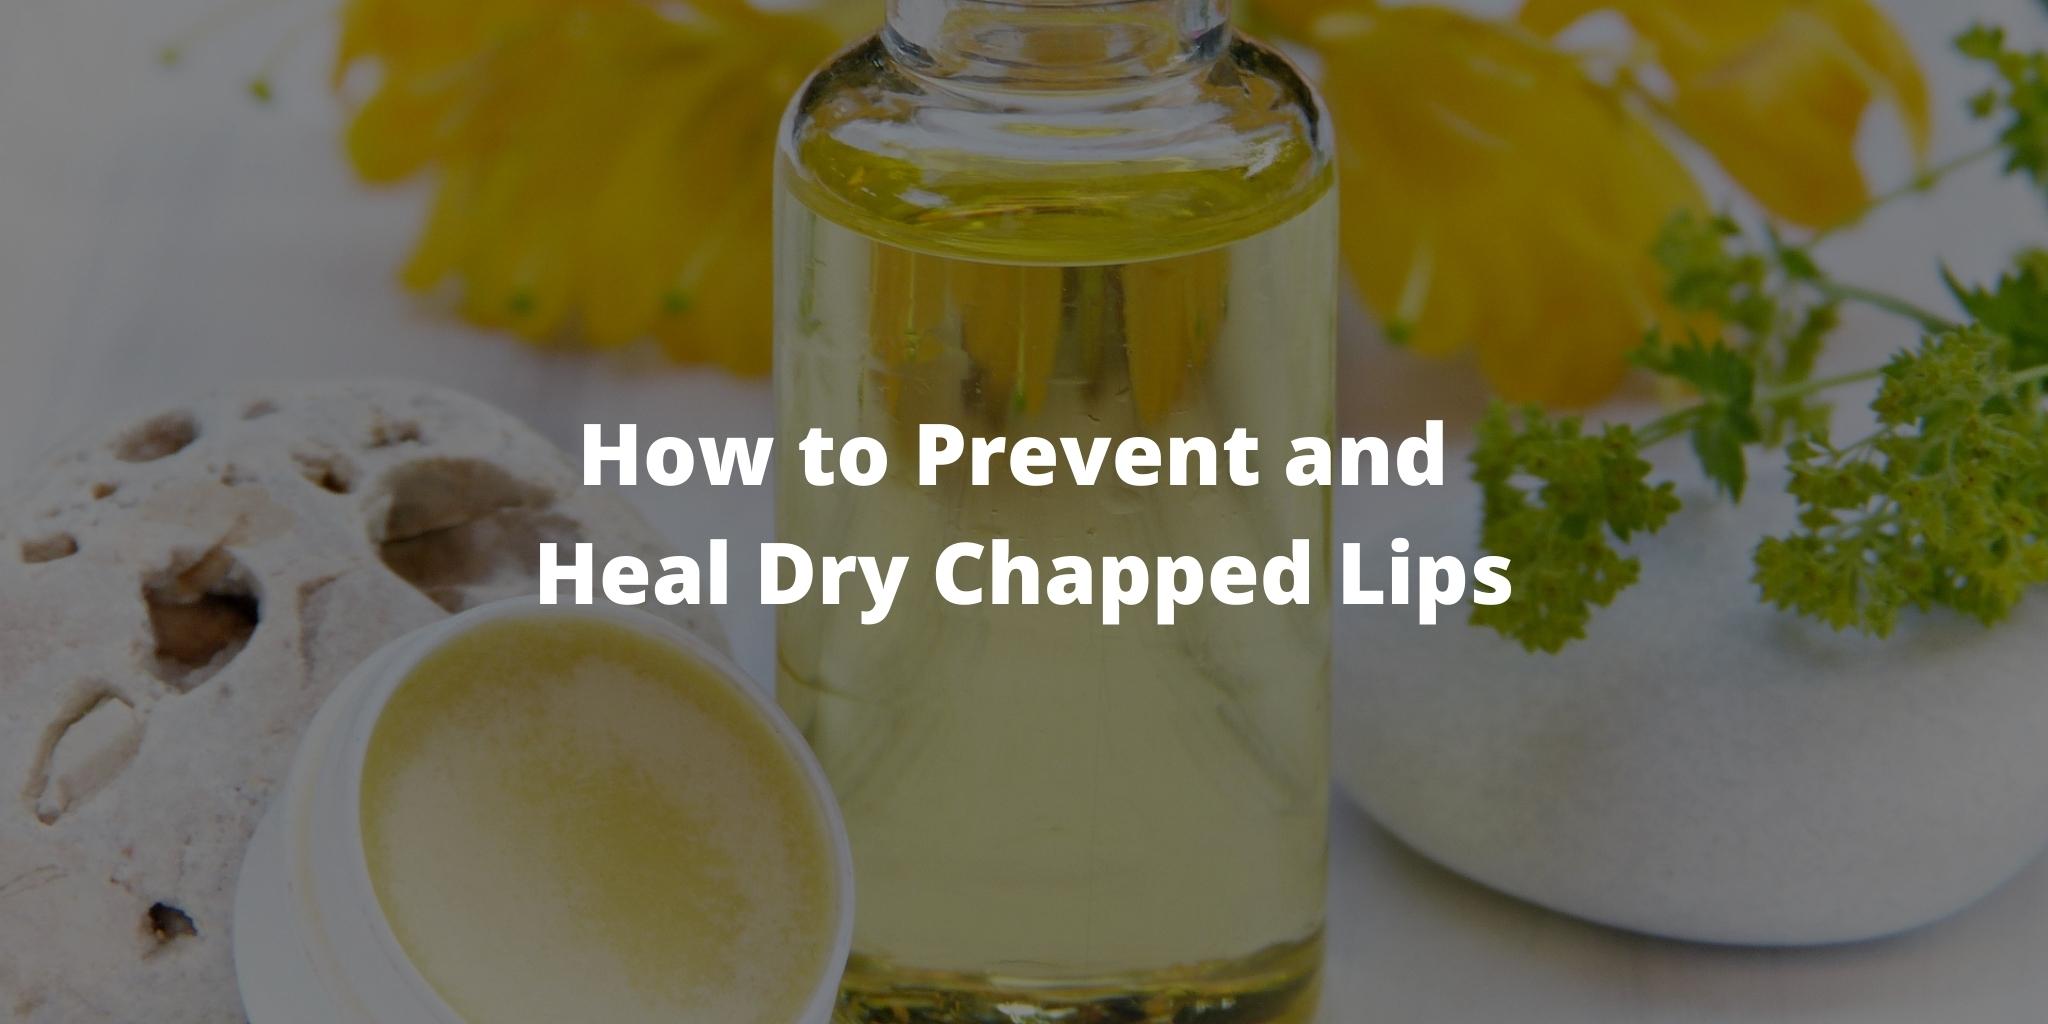 How to Prevent and Heal Dry Chapped Lips